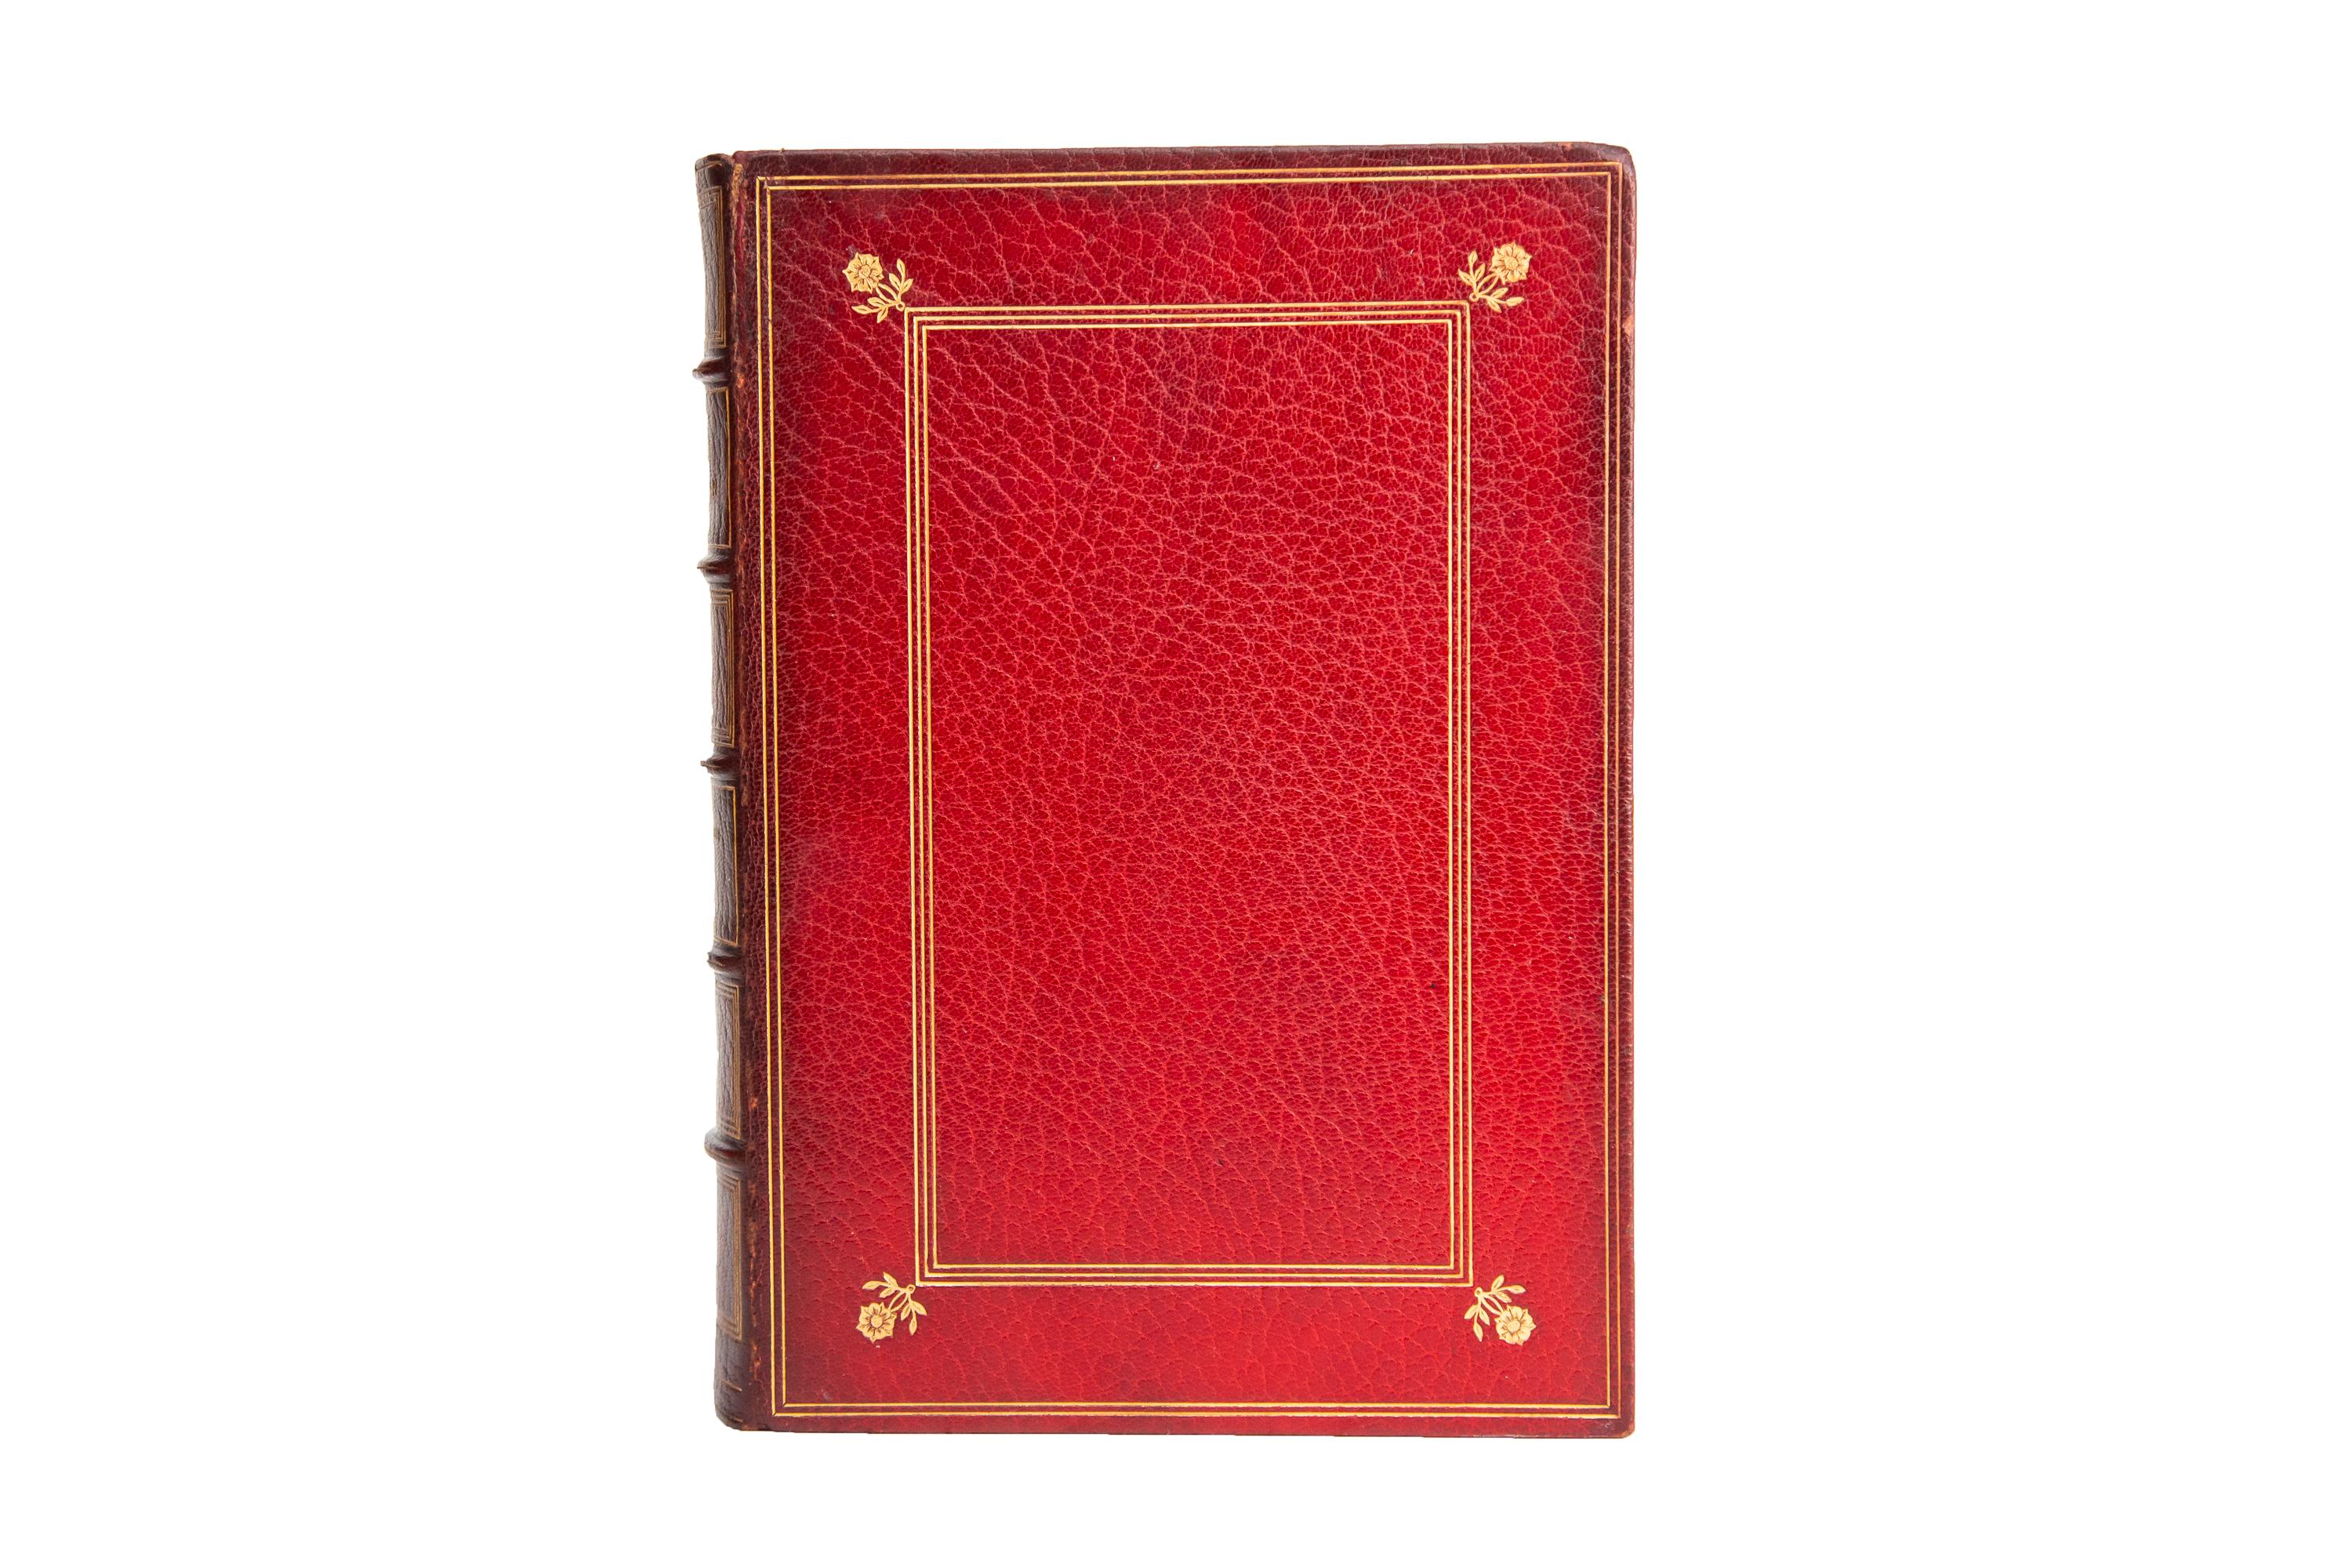 10 Volumes. Walt Whitman, The Complete Writings. Paumanok Edition. Bound in full red morocco with the covers displaying bordering and corner floral details in gilt tooling. Raised bands gilt with panels displaying bordering, floral details, and